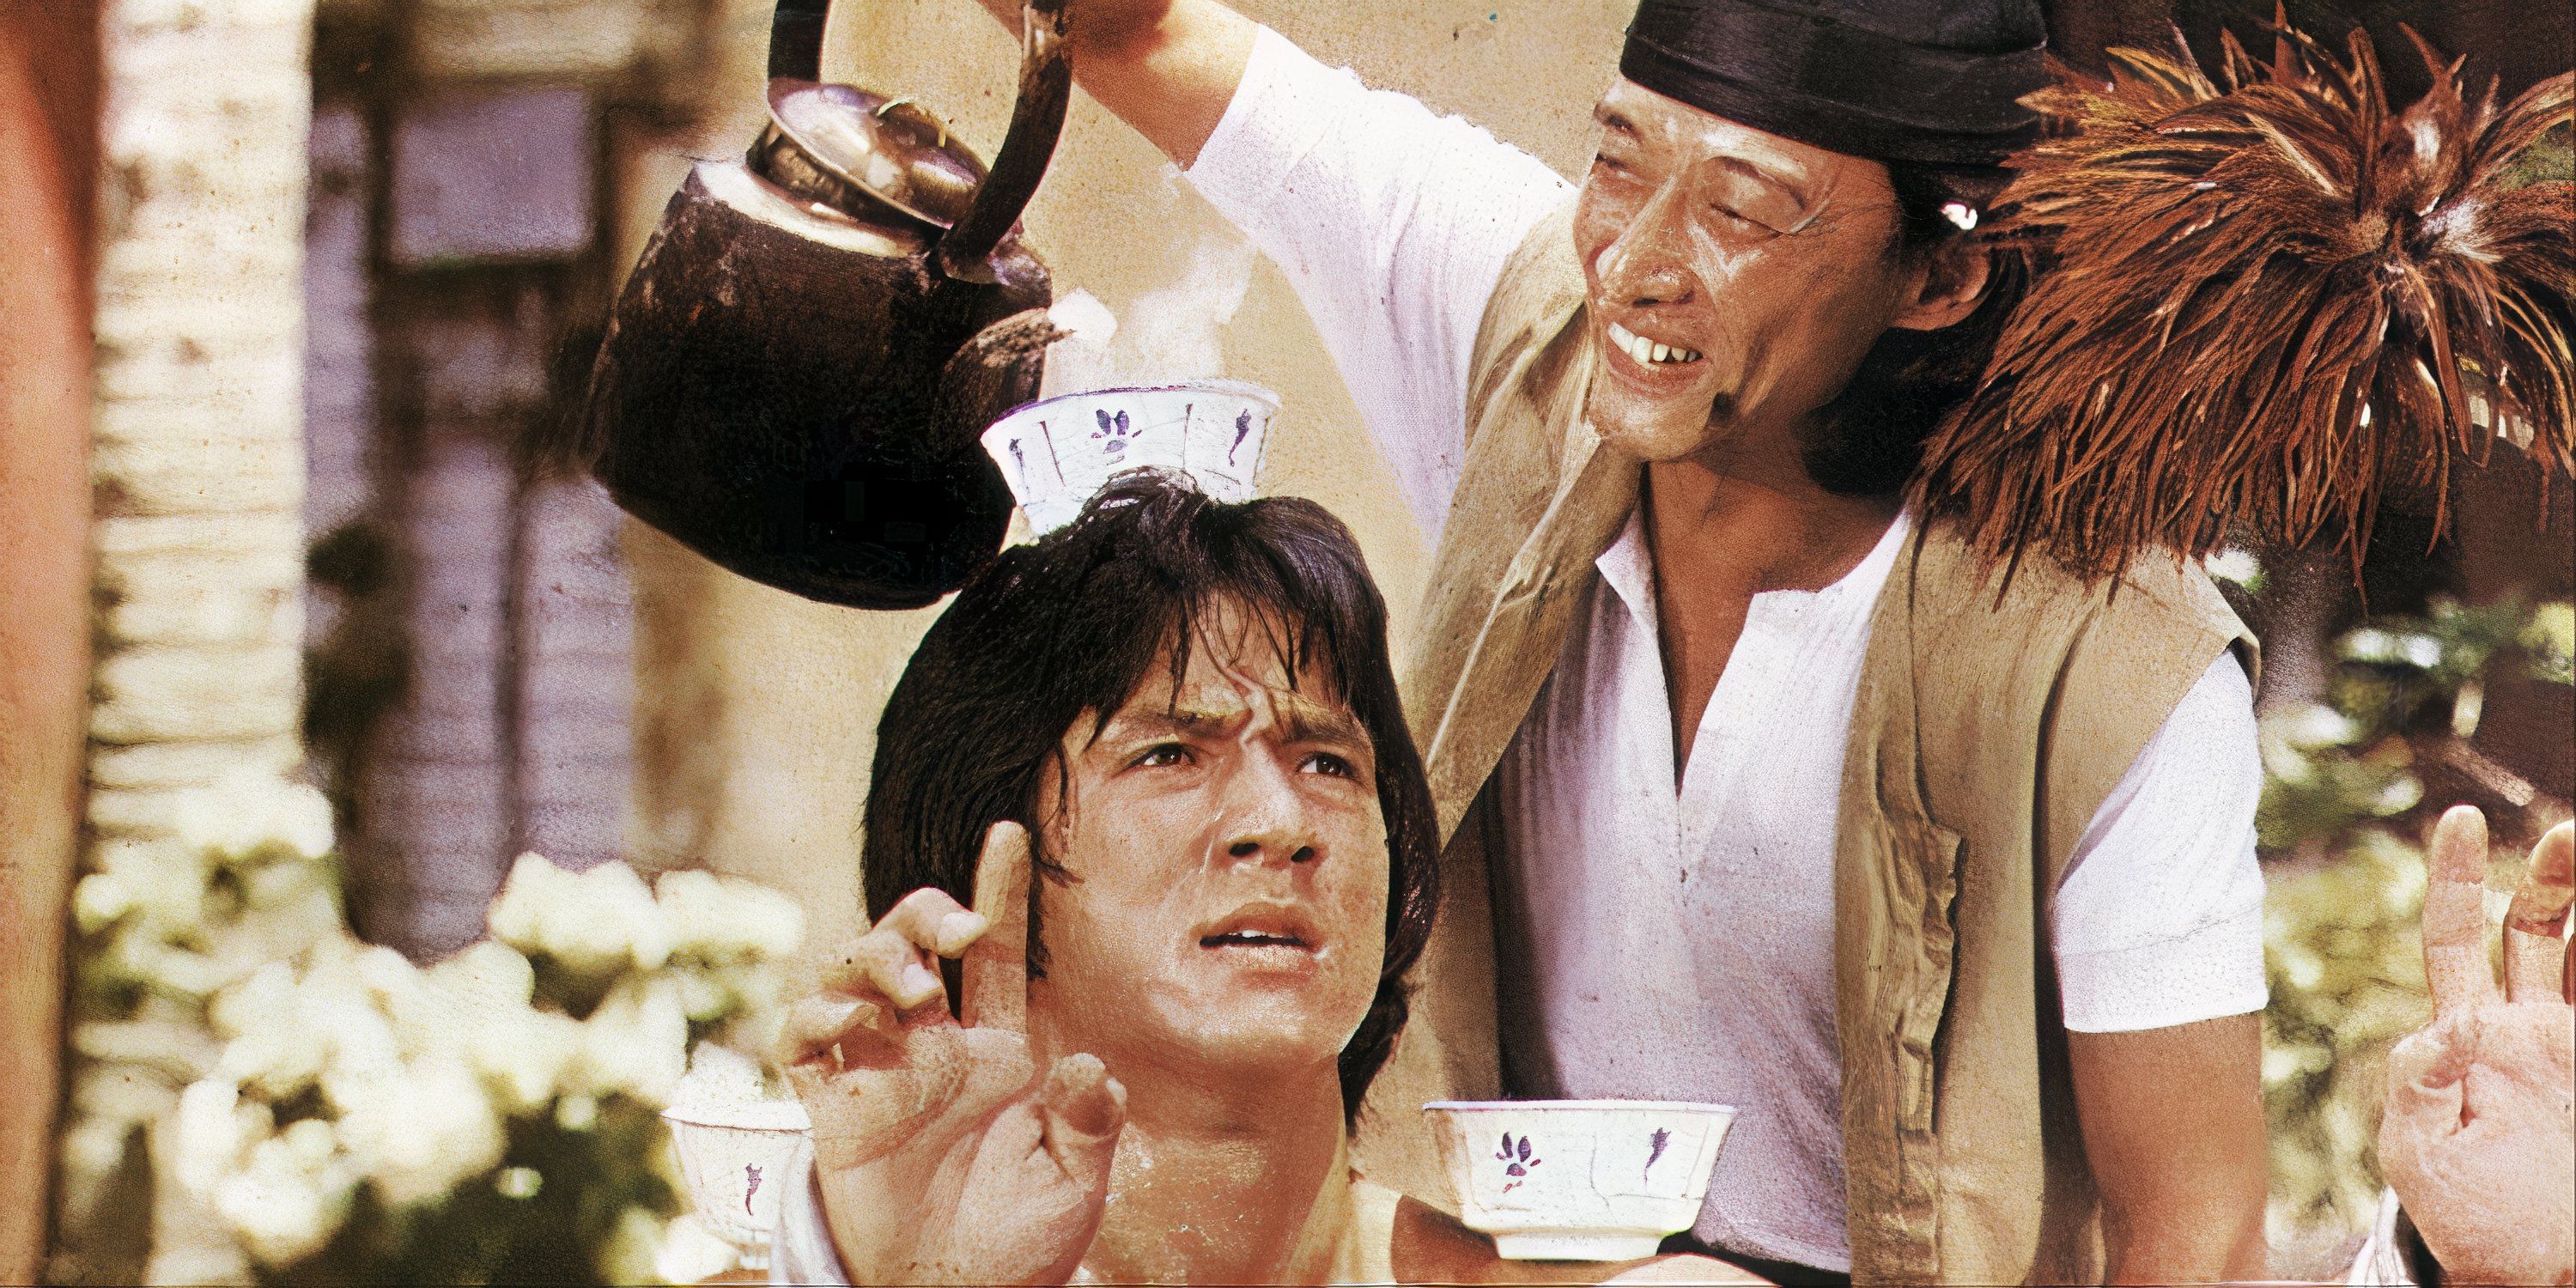 Jackie Chan balances tea cups on his head and shoulders as a man pours tea into them in Drunken Master.